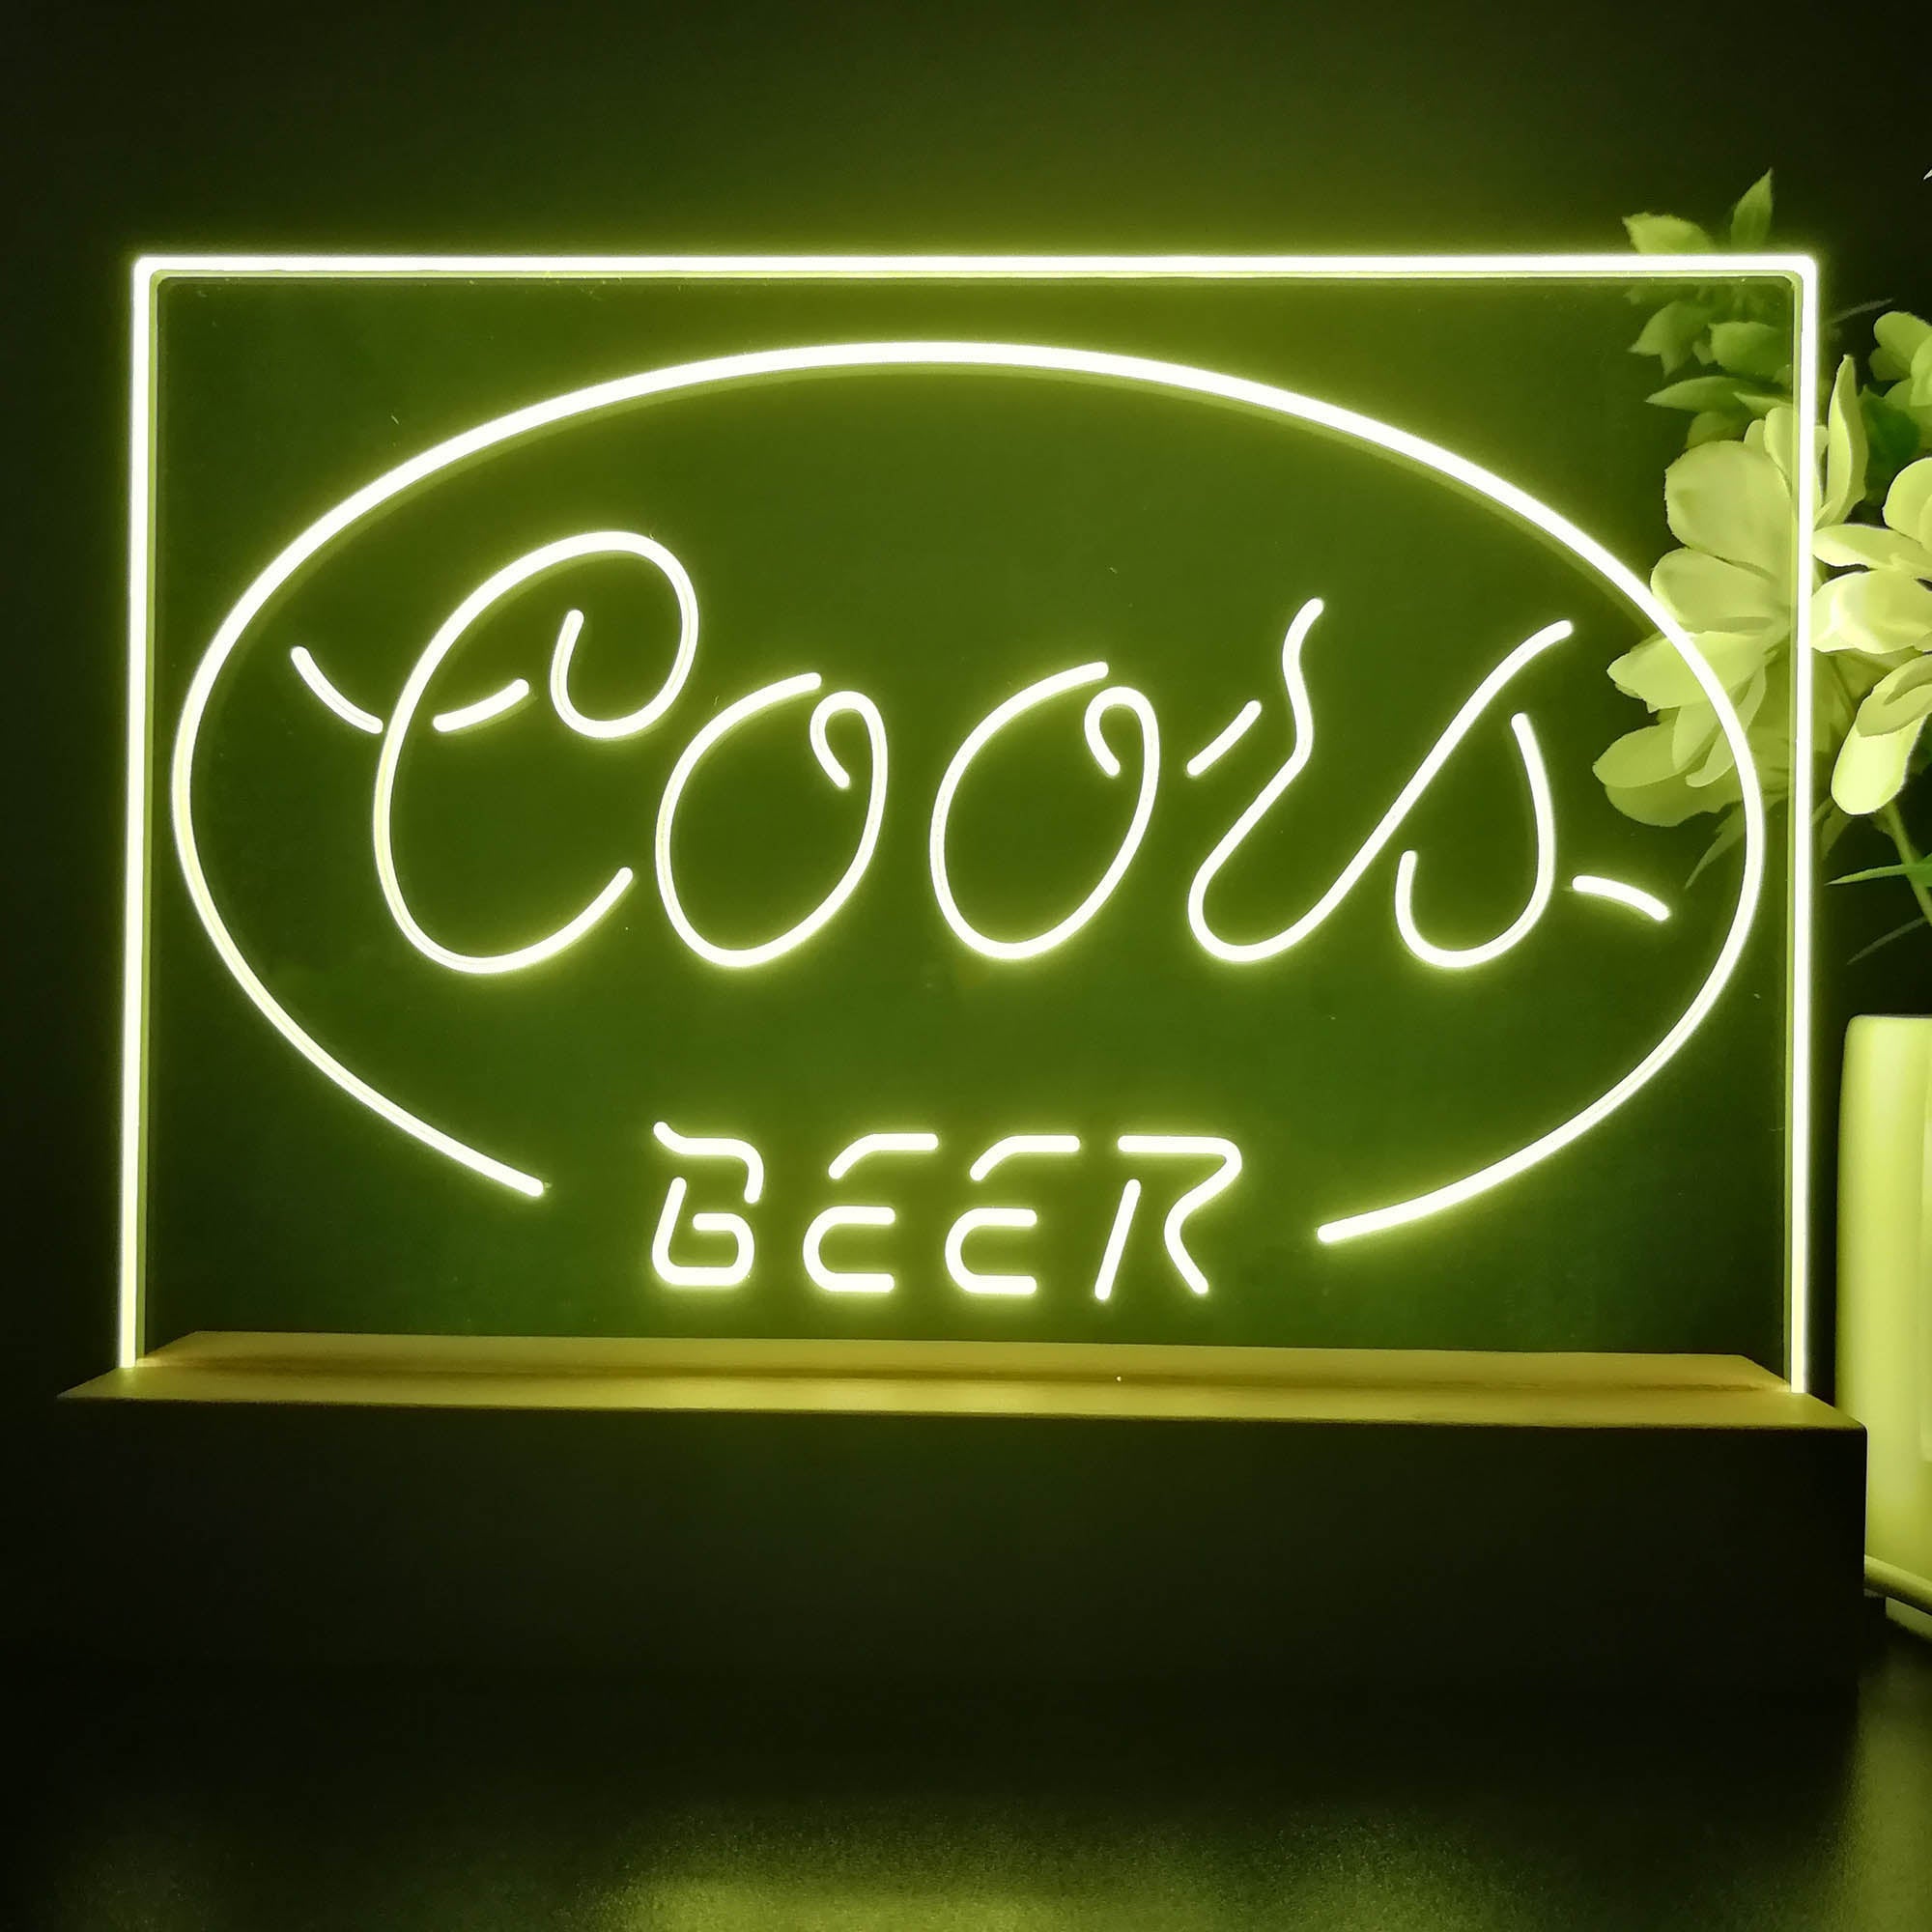 Coors Beer Oval Classic Neon Sign Pub Bar Lamp